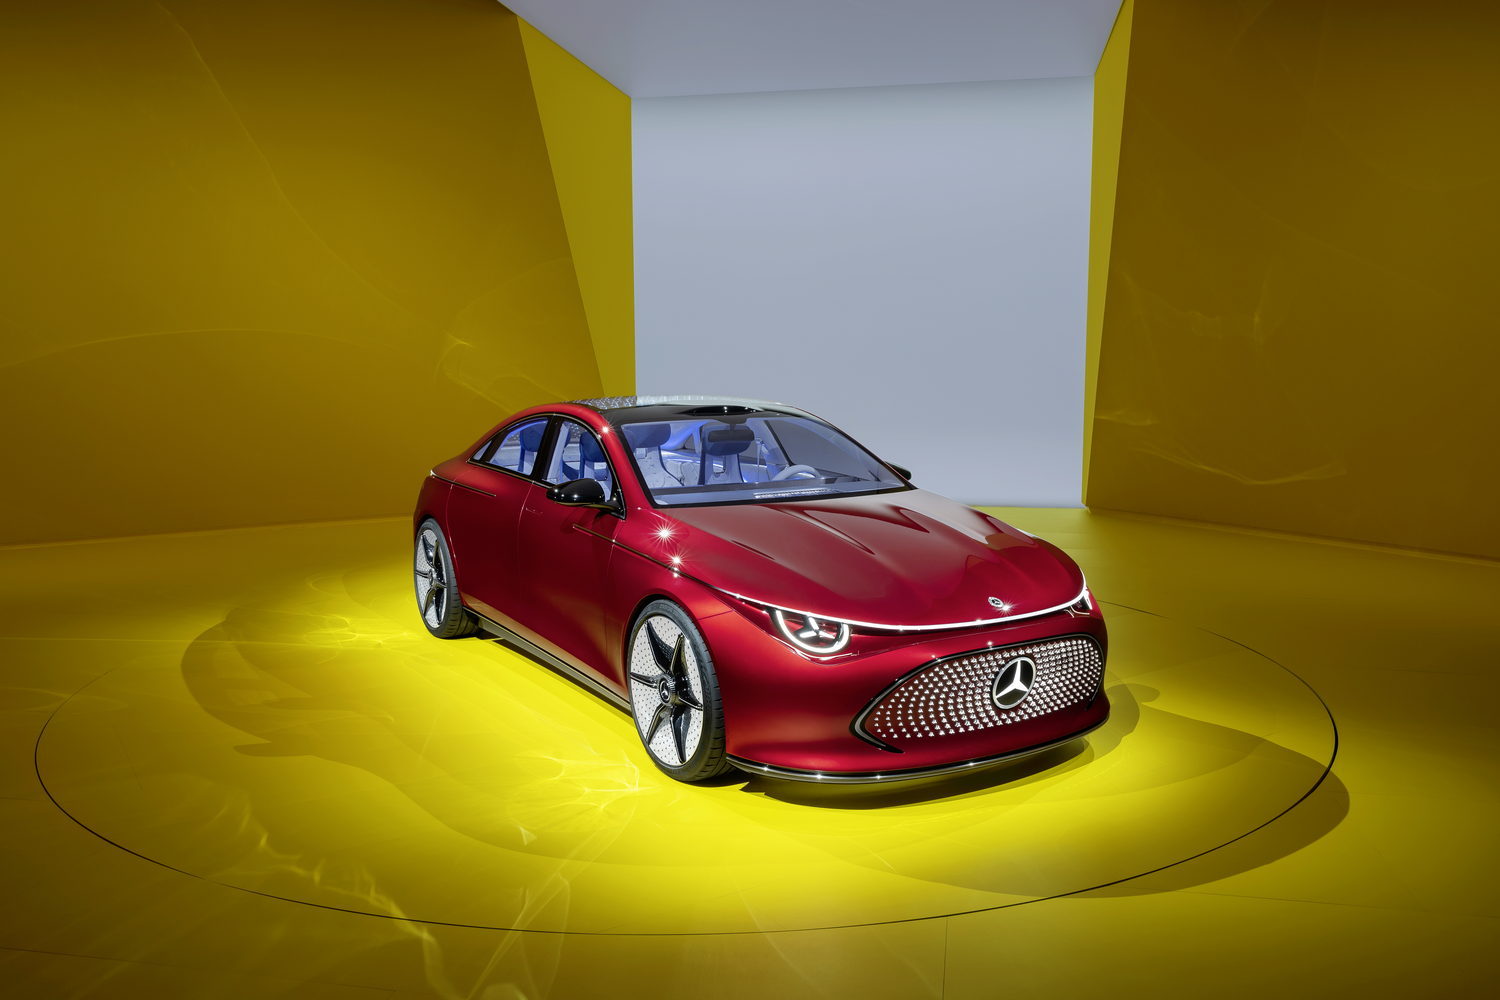 Electric Mercedes CLA previewed with concept